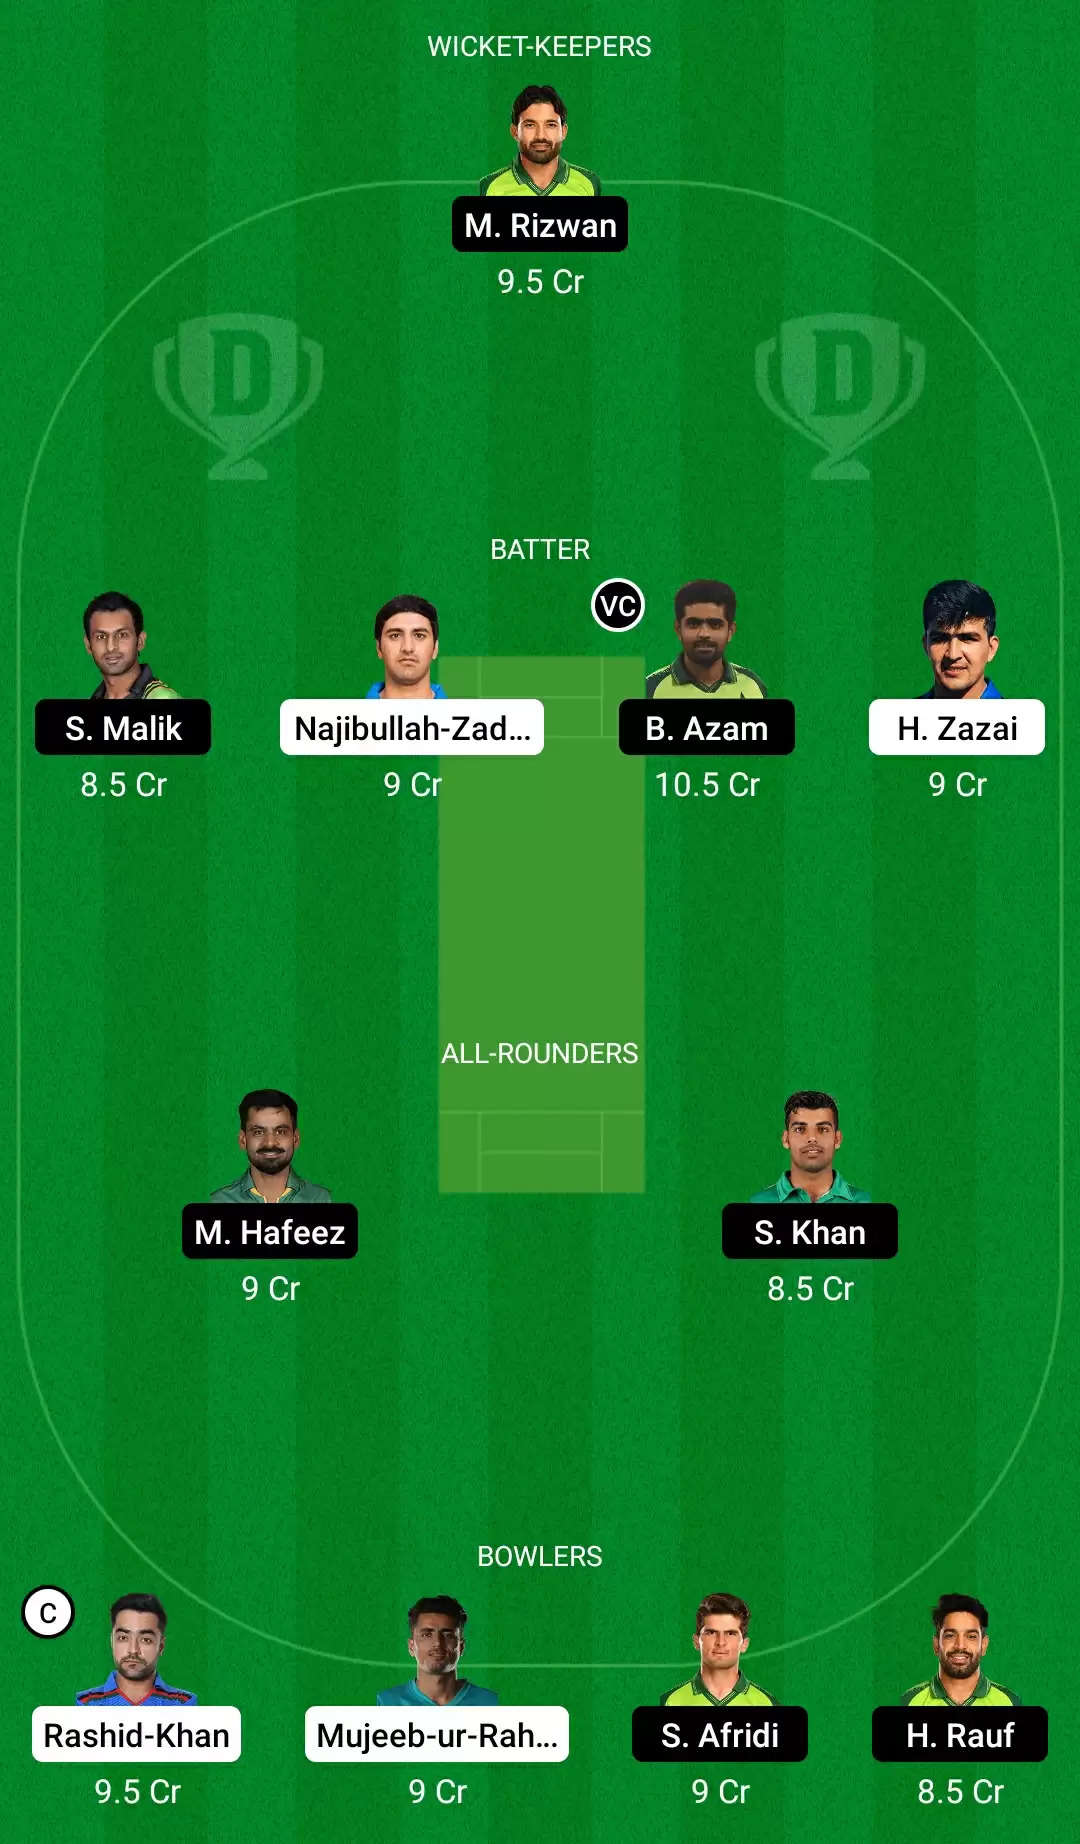 AFG vs PAK Dream11 Prediction for T20 World Cup 2021: Playing XI, Fantasy Cricket Tips, Team, Weather Updates and Pitch Report